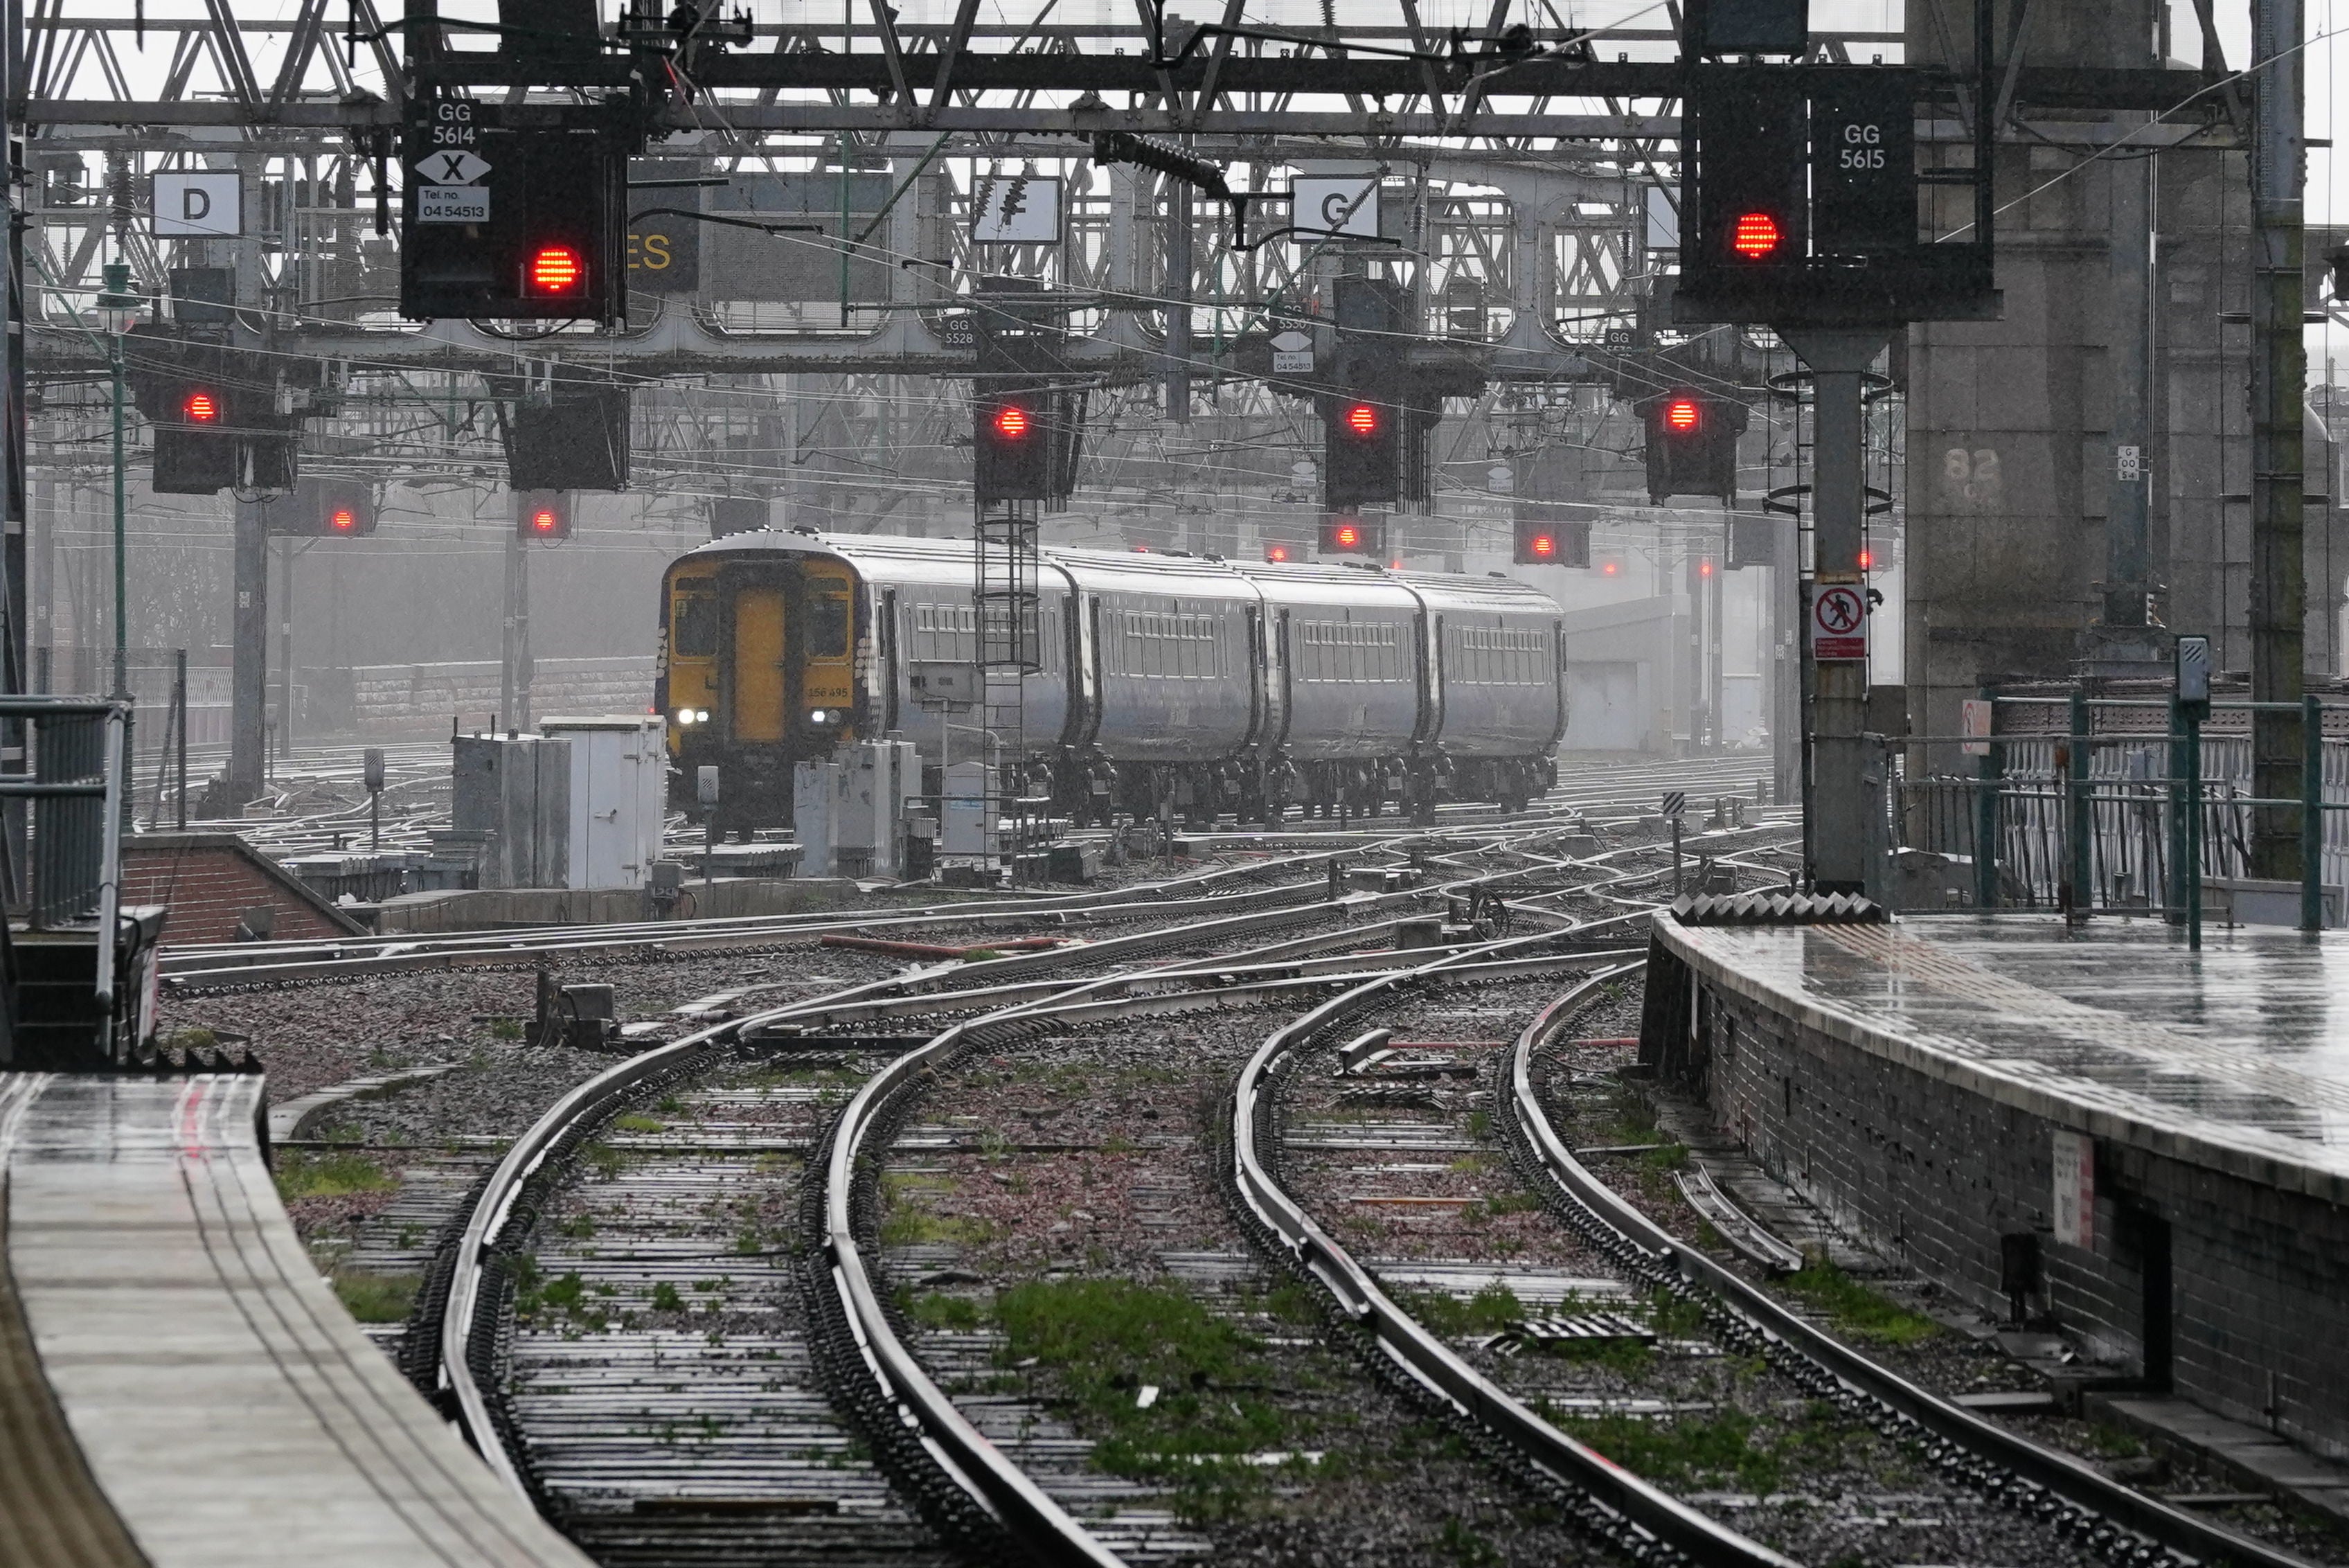 Storm Dudley caused widespread travel chaos in Scotland, with most trains cancelled after 4pm